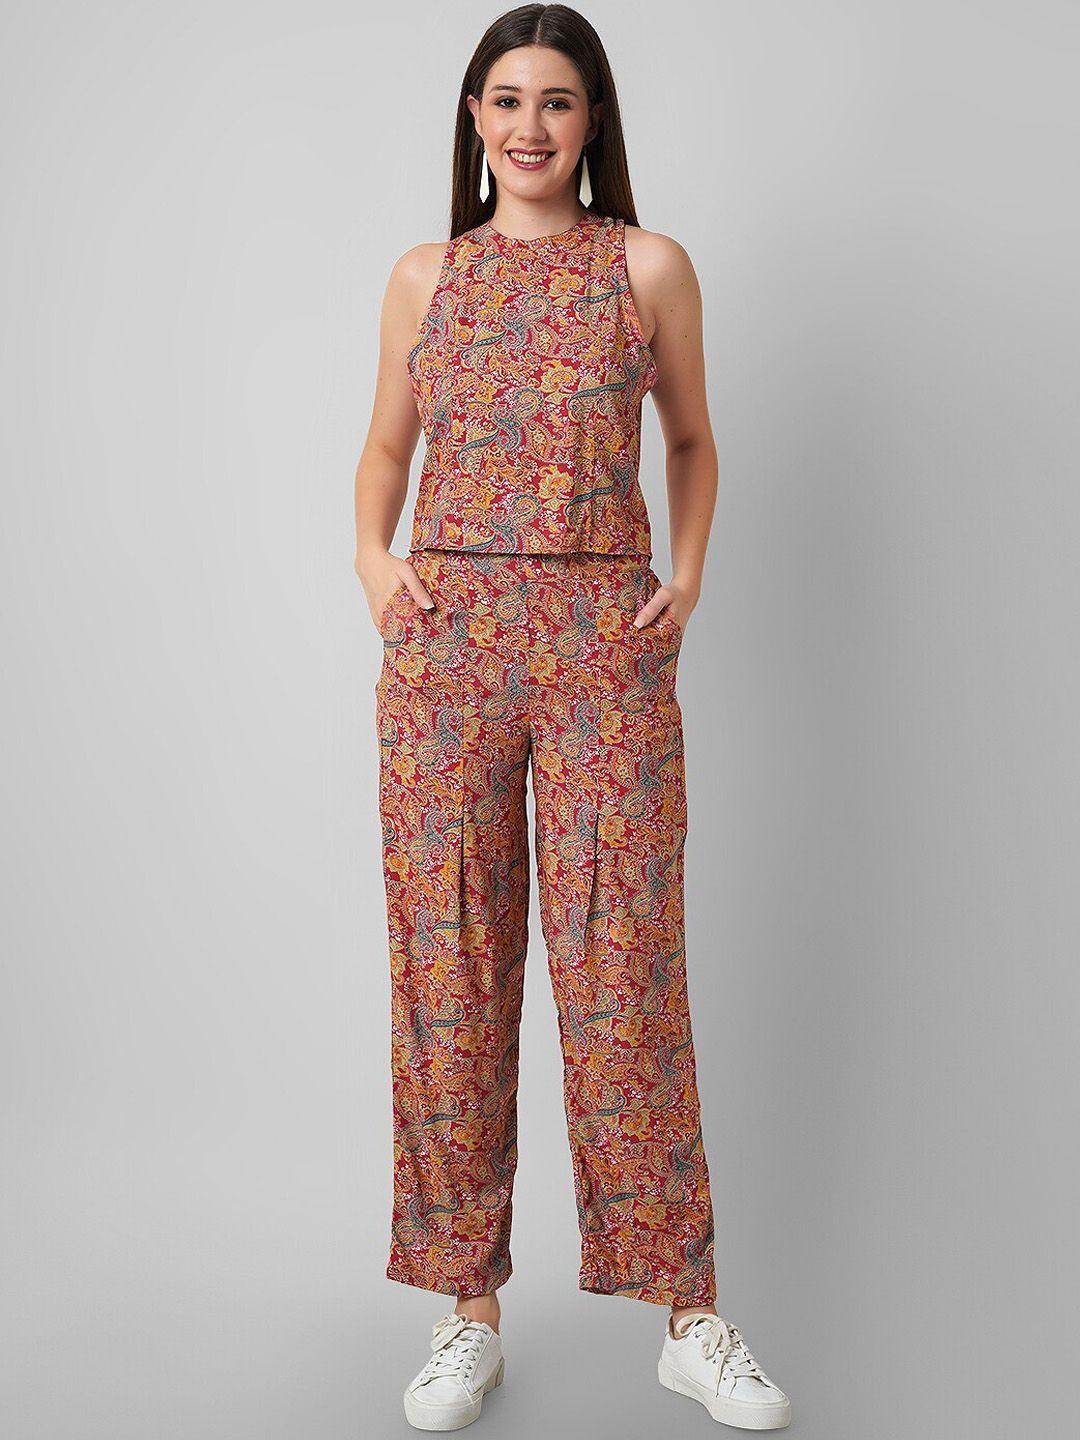 haute and humble printed top & trousers co-ords